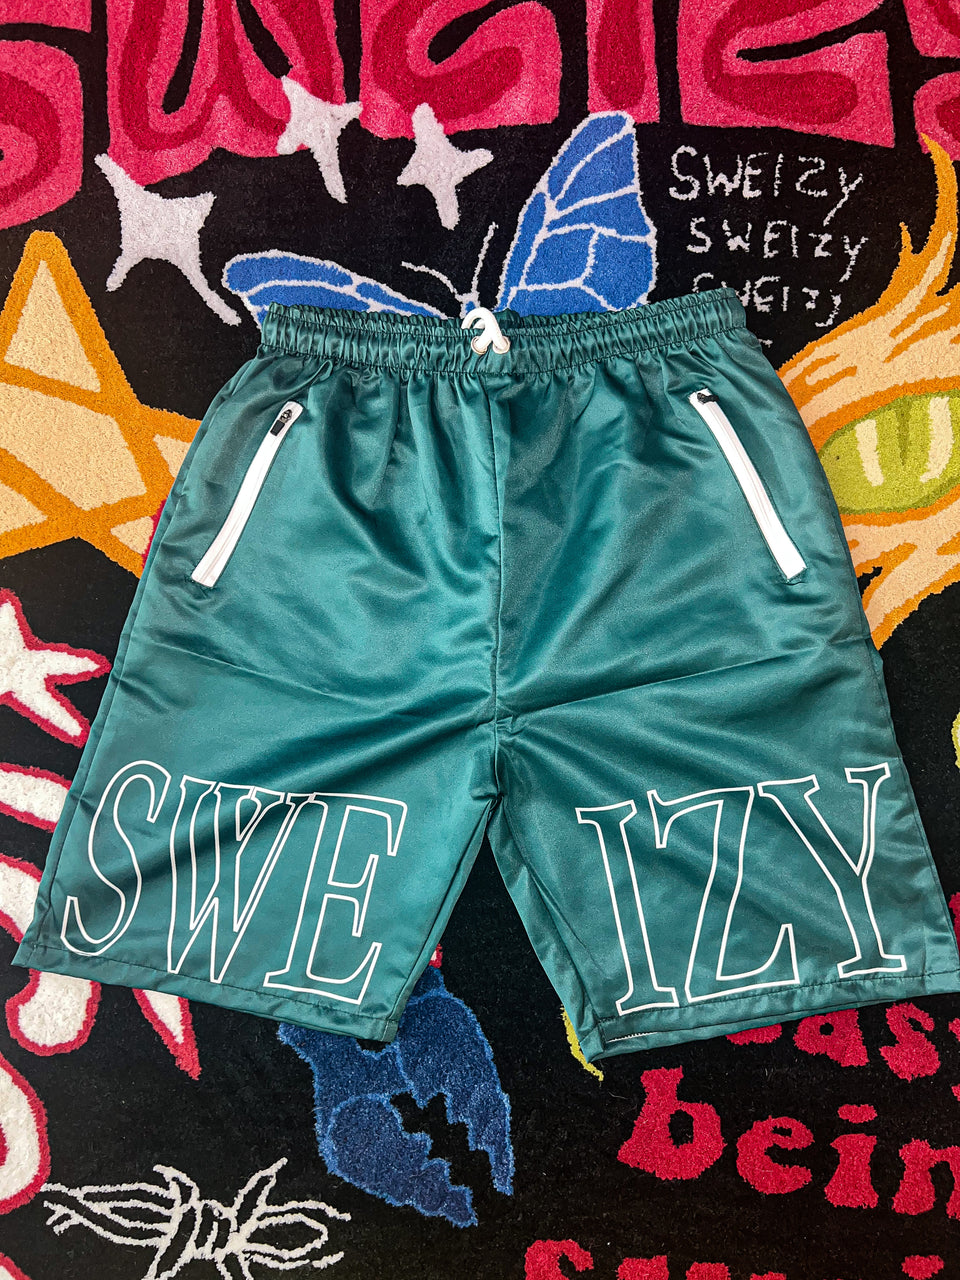 SWEIZY TRACK SHORTS